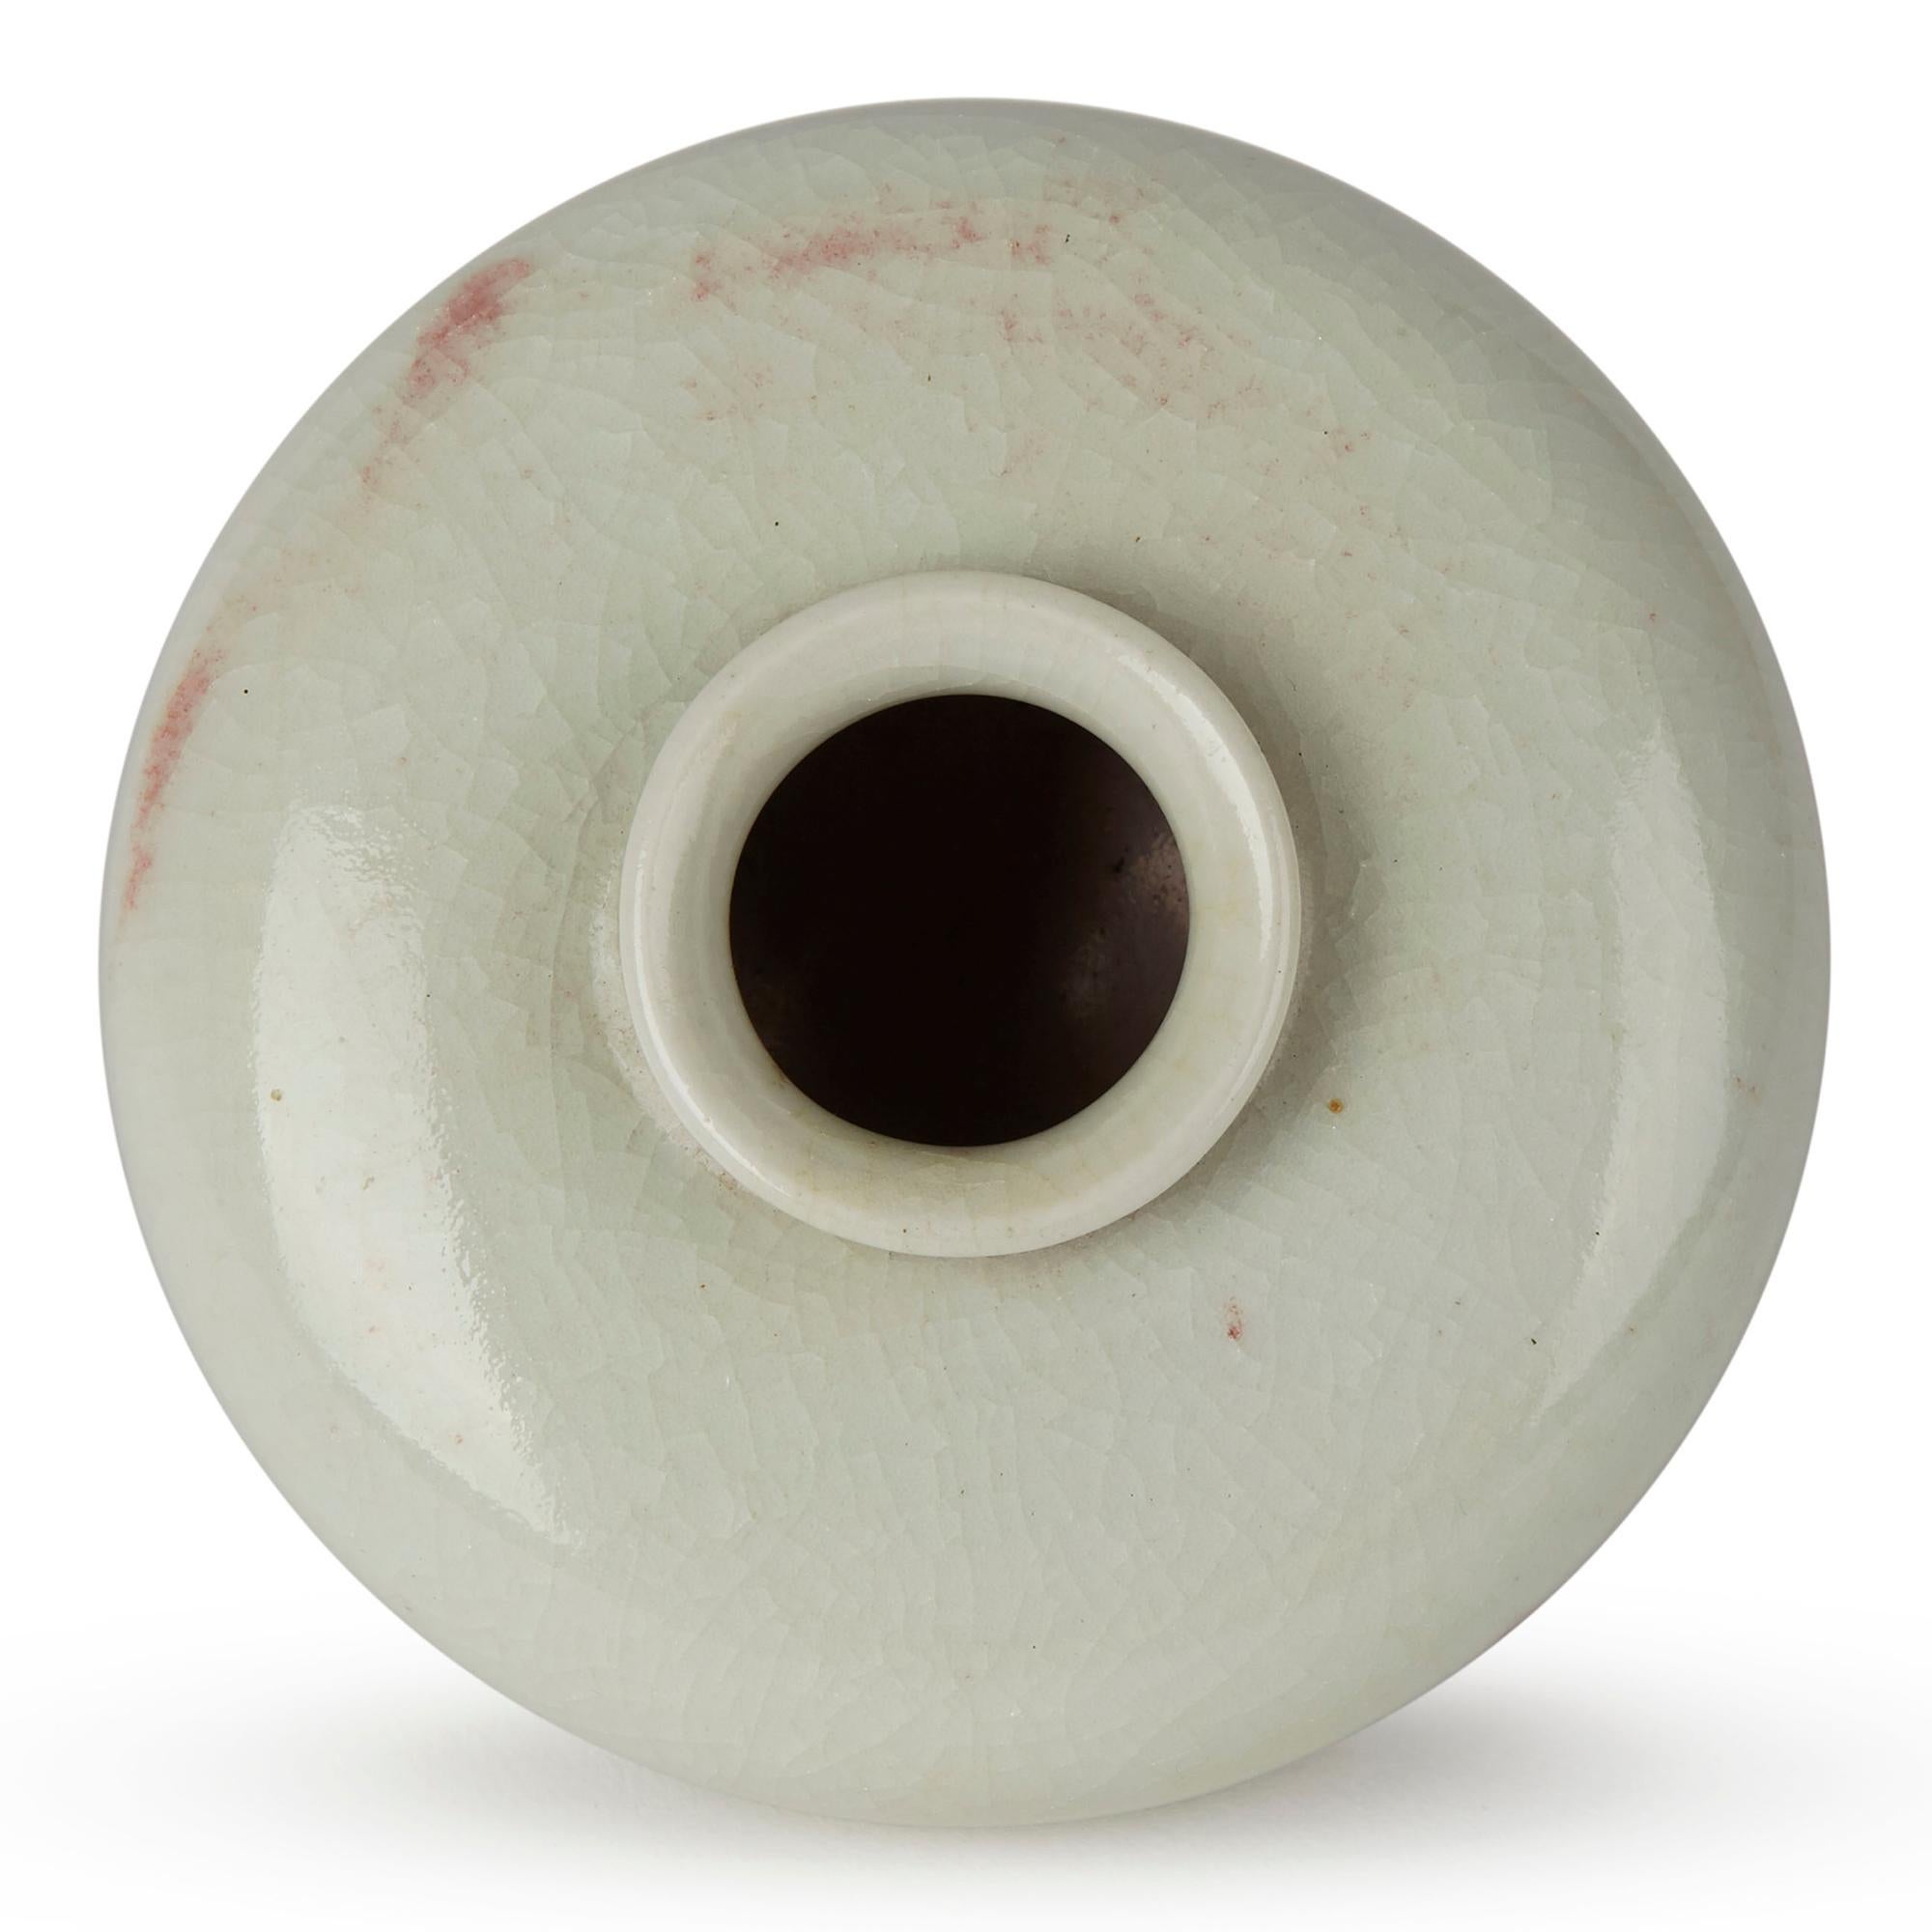 Ceramic William Mehornay Studio Pottery Porcelain Red and White Vase, 1980-1985 For Sale